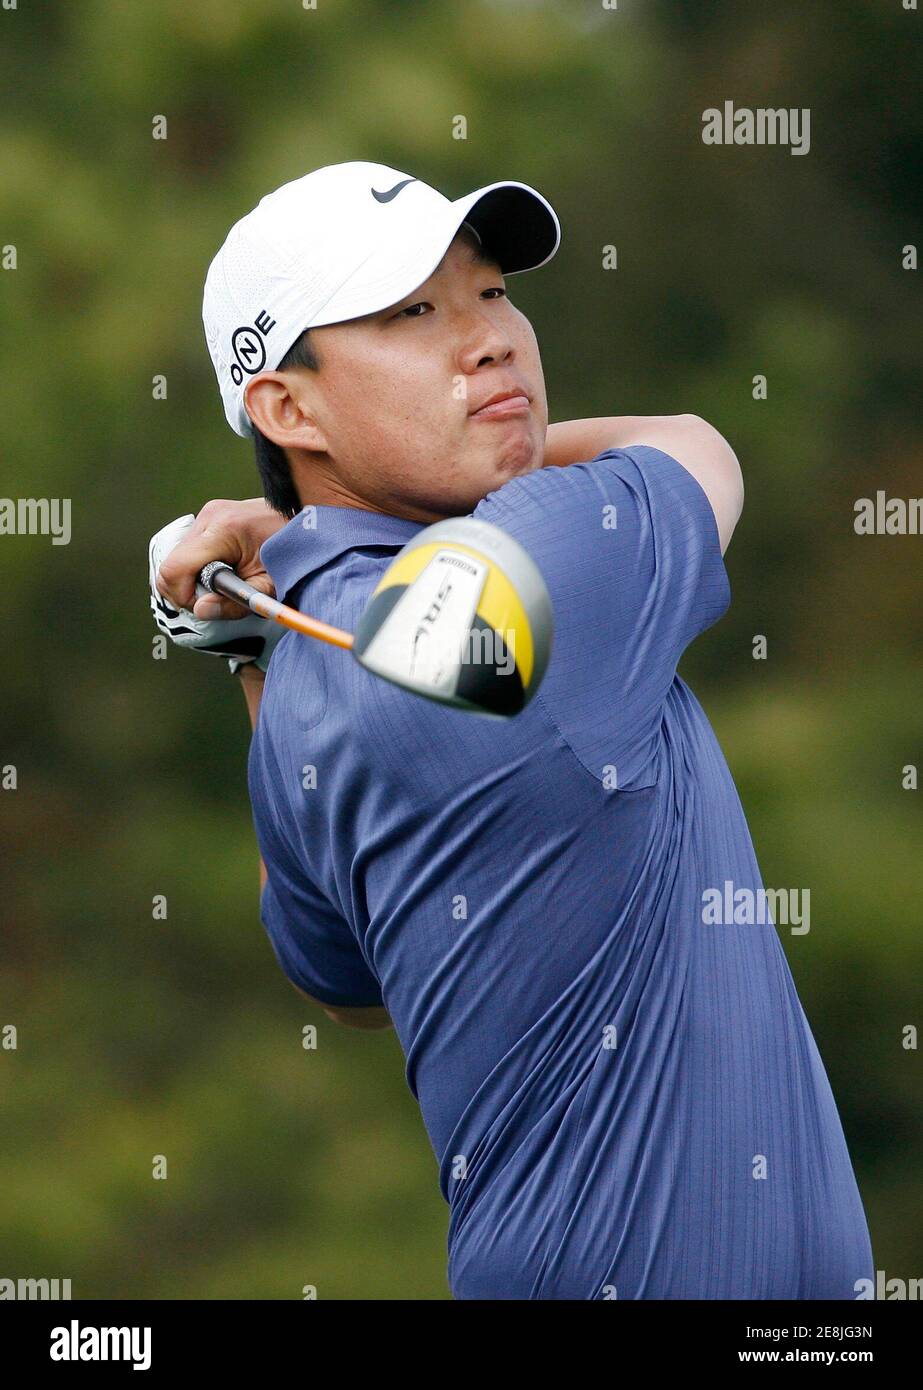 Anthony Kim of the U.S. tees off on the 7th hole during the final round of the EPGA Ballantine's Championship golf tournament at the Pinx Golf Club in Seogwipo on Jeju Island March 16, 2008.  REUTERS/Jo Yong-Hak (SOUTH KOREA) Stock Photo